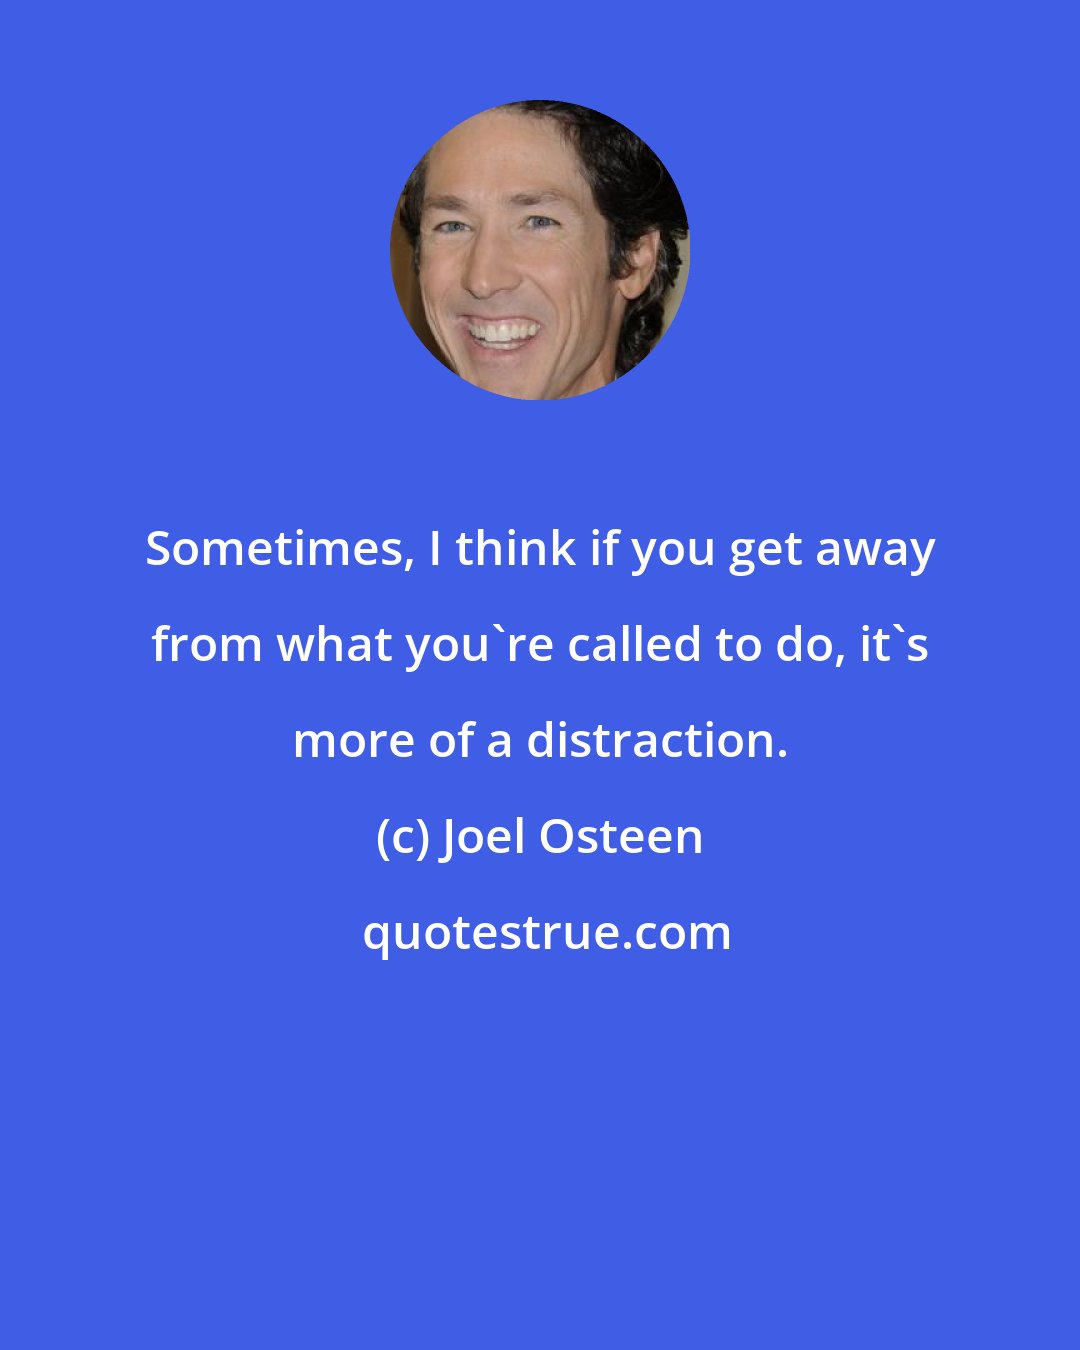 Joel Osteen: Sometimes, I think if you get away from what you're called to do, it's more of a distraction.